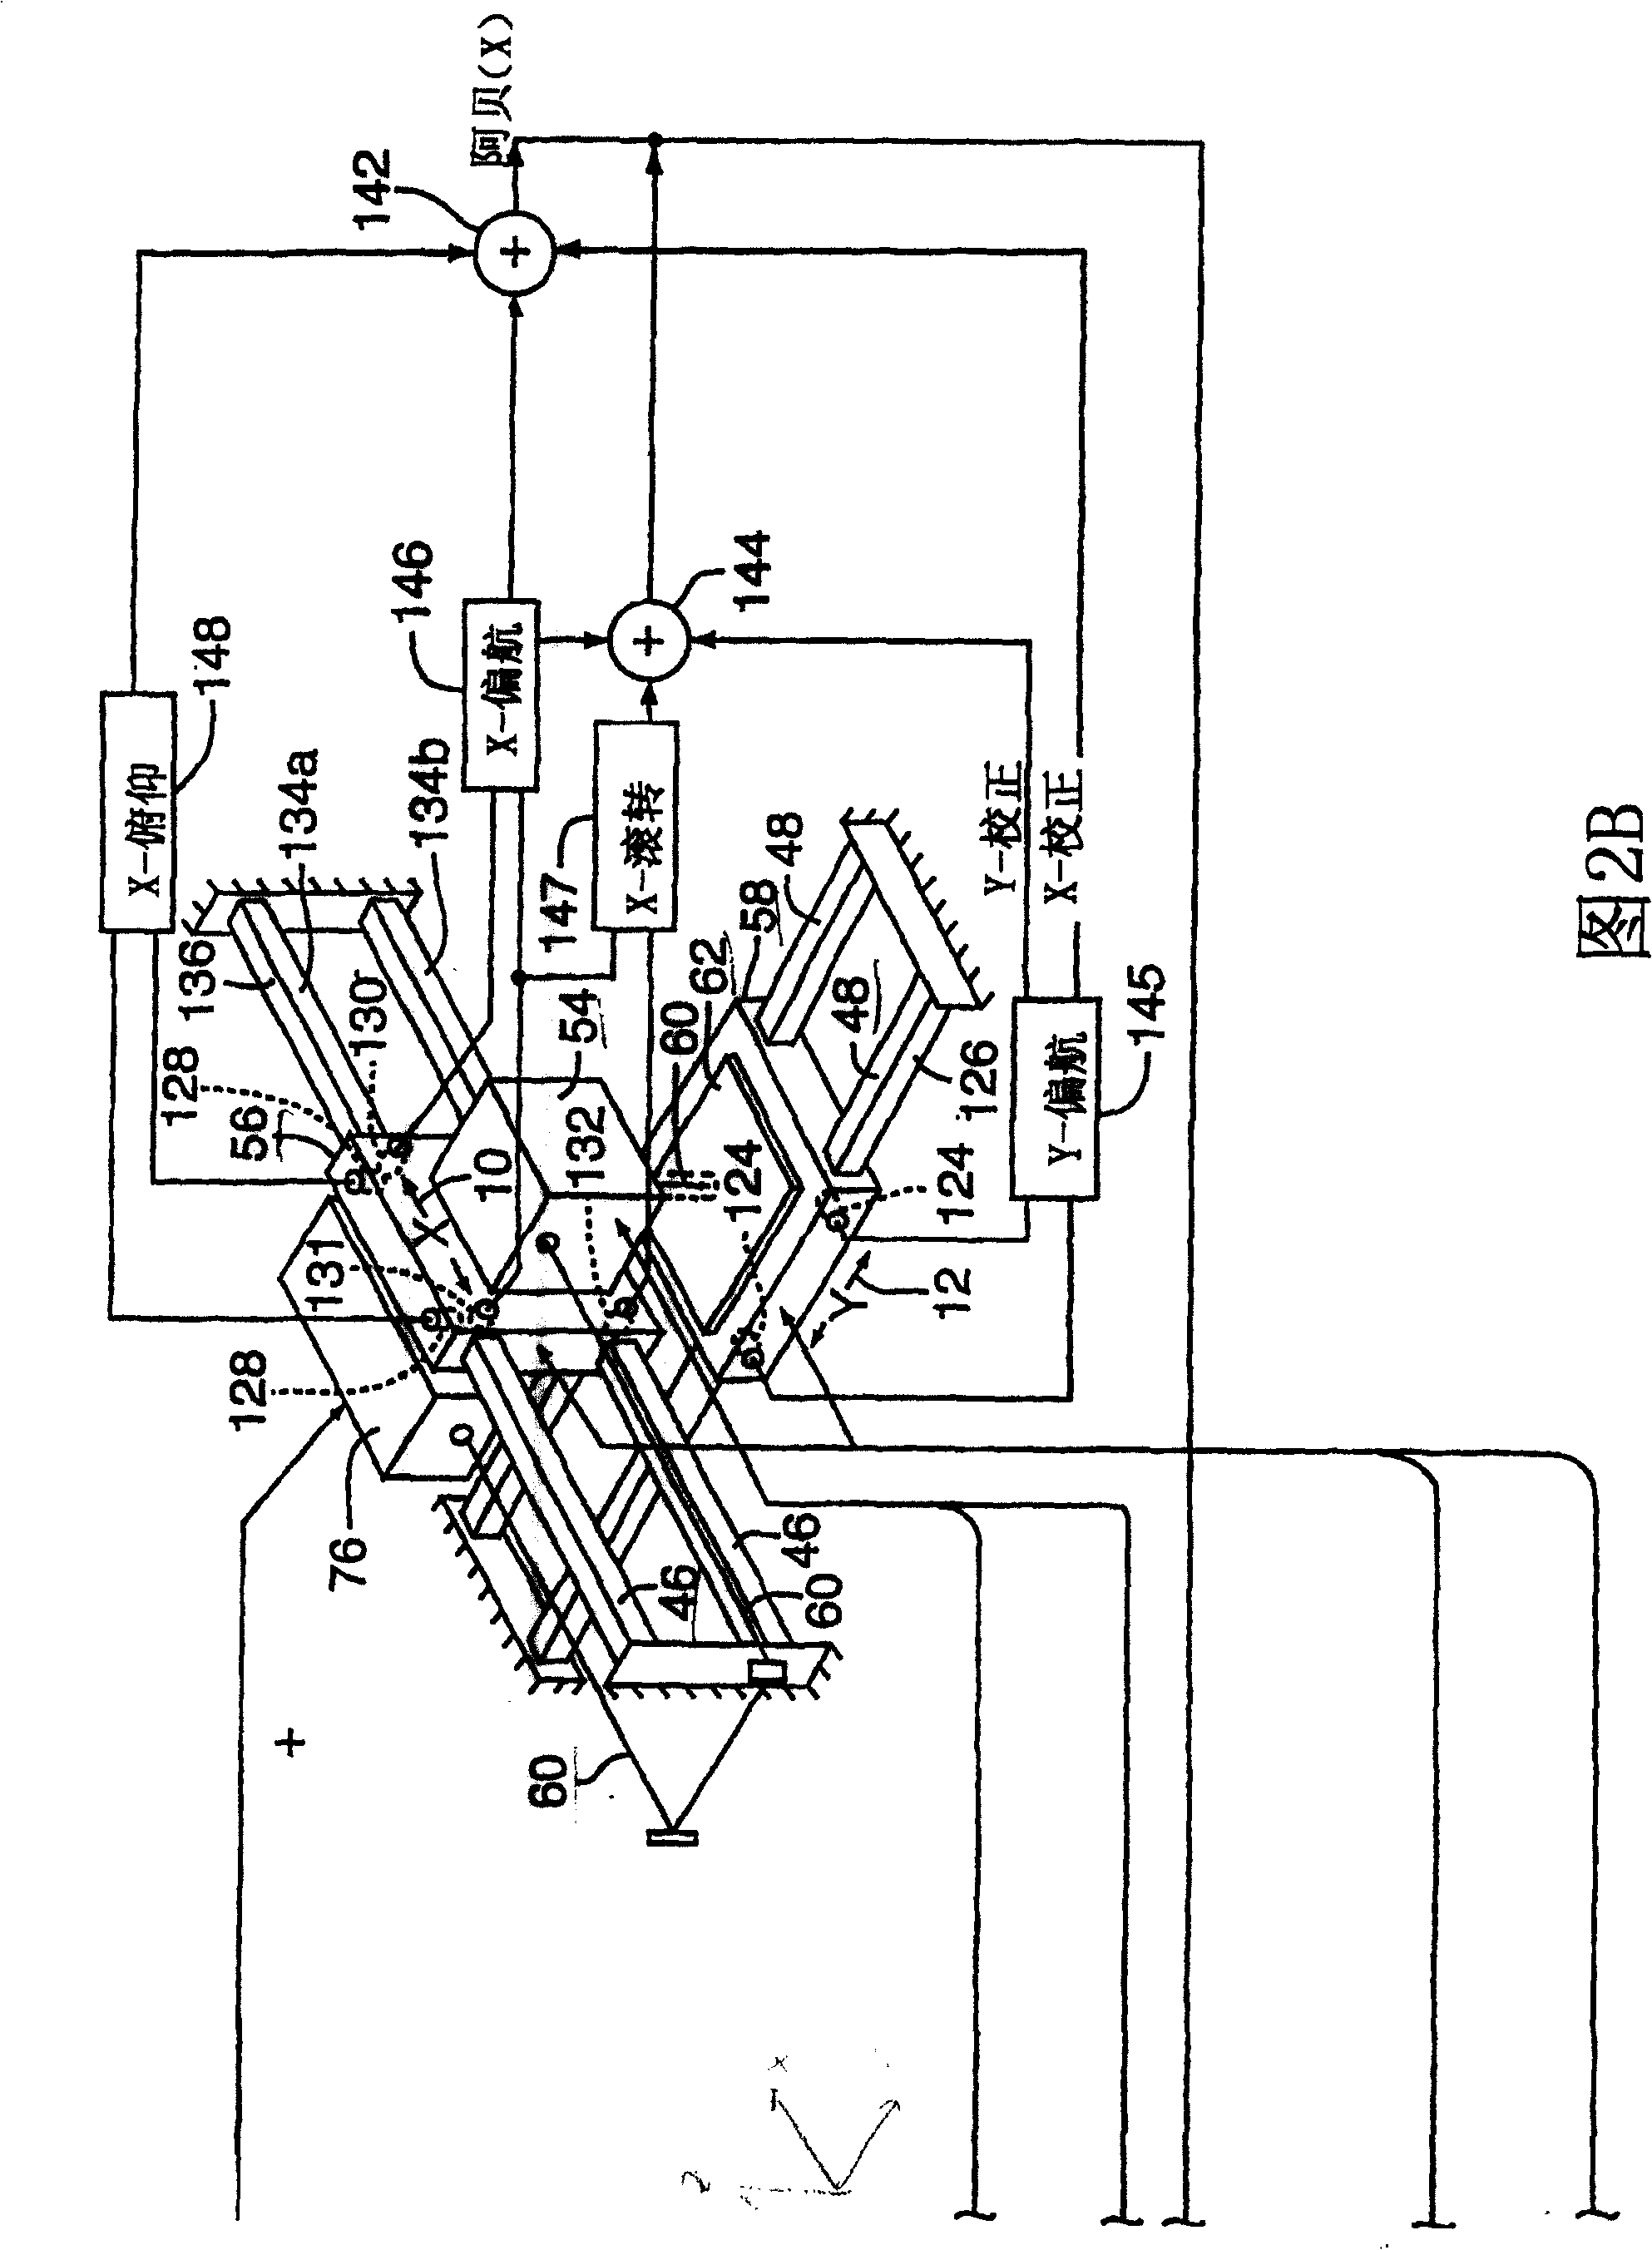 Abbe error correction system and method